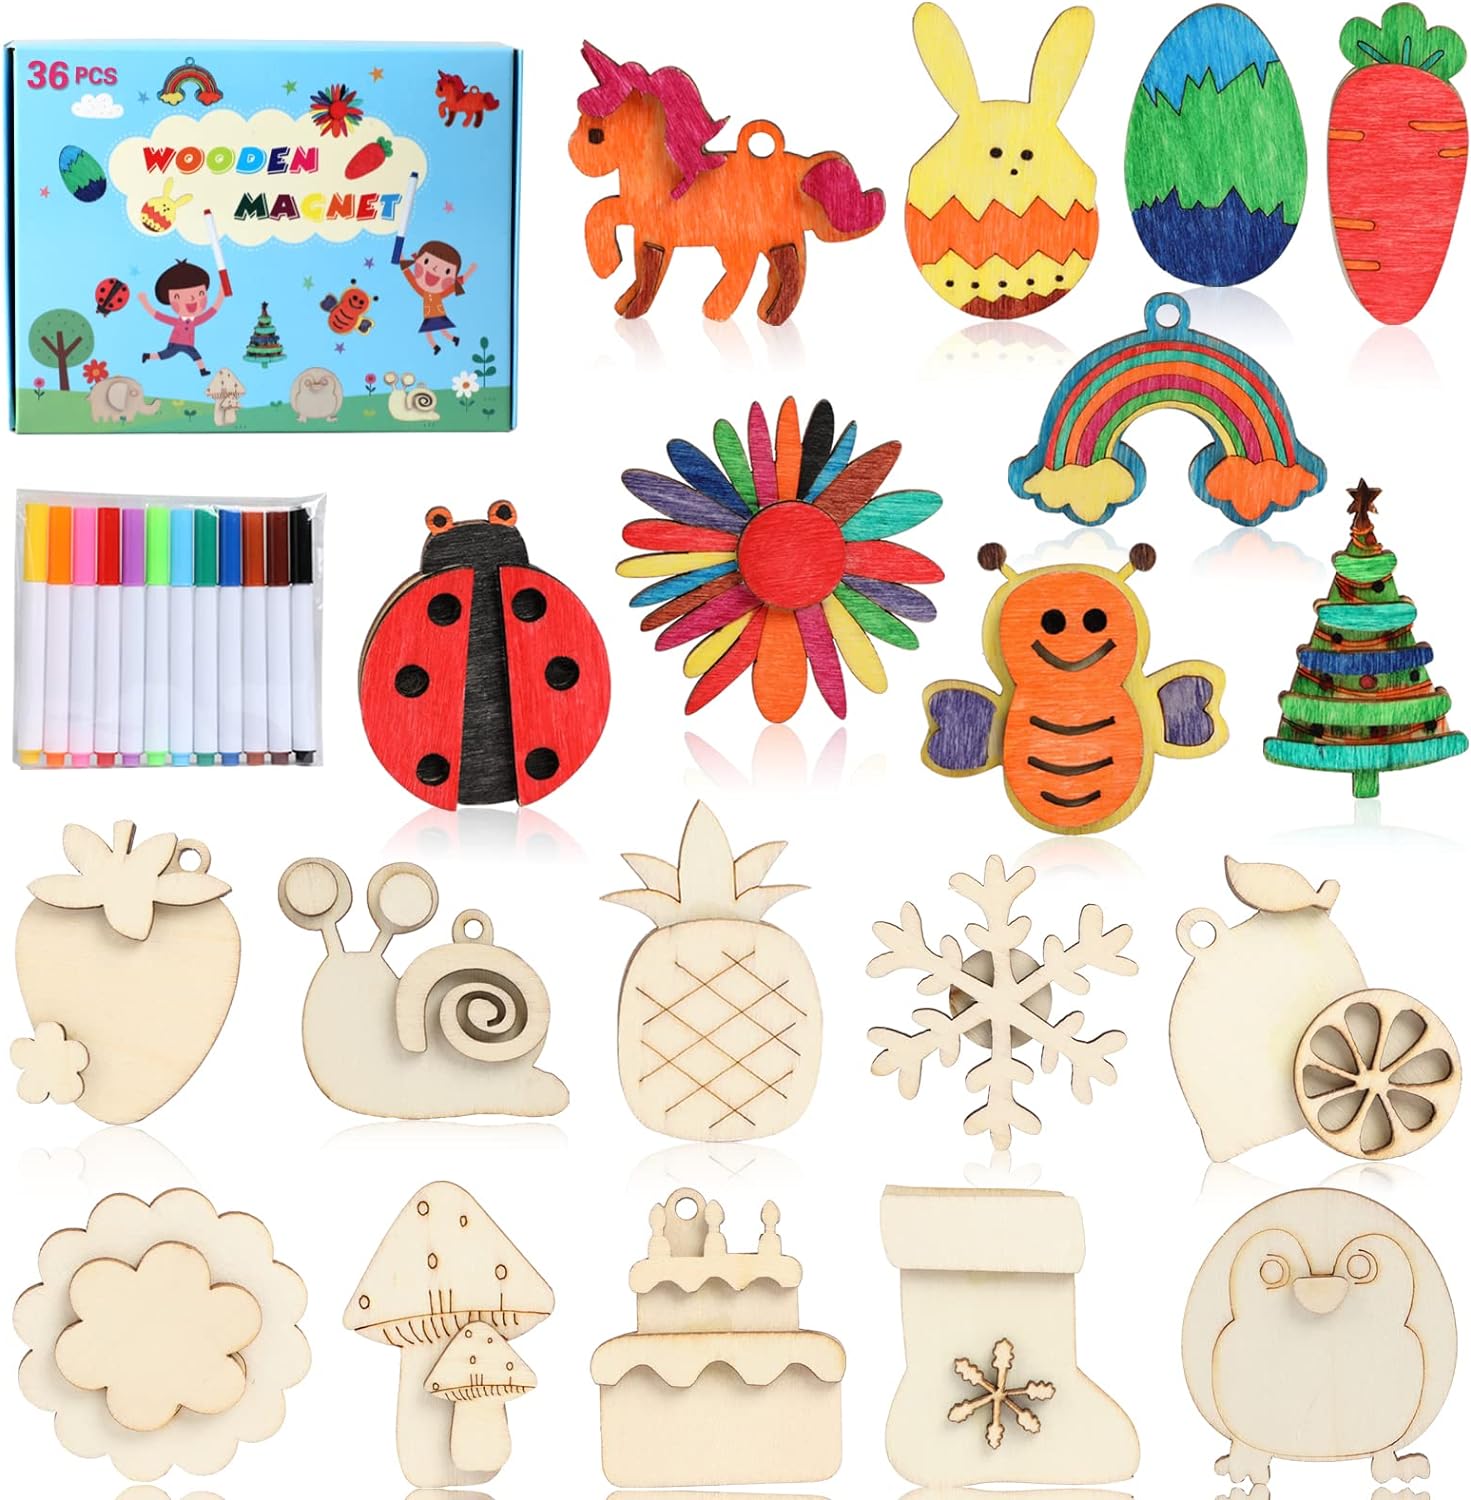 DIY Wooden Magnets, 36 pcs Wooden Art Craft Supplies Painting Kit for Kids Party Favors